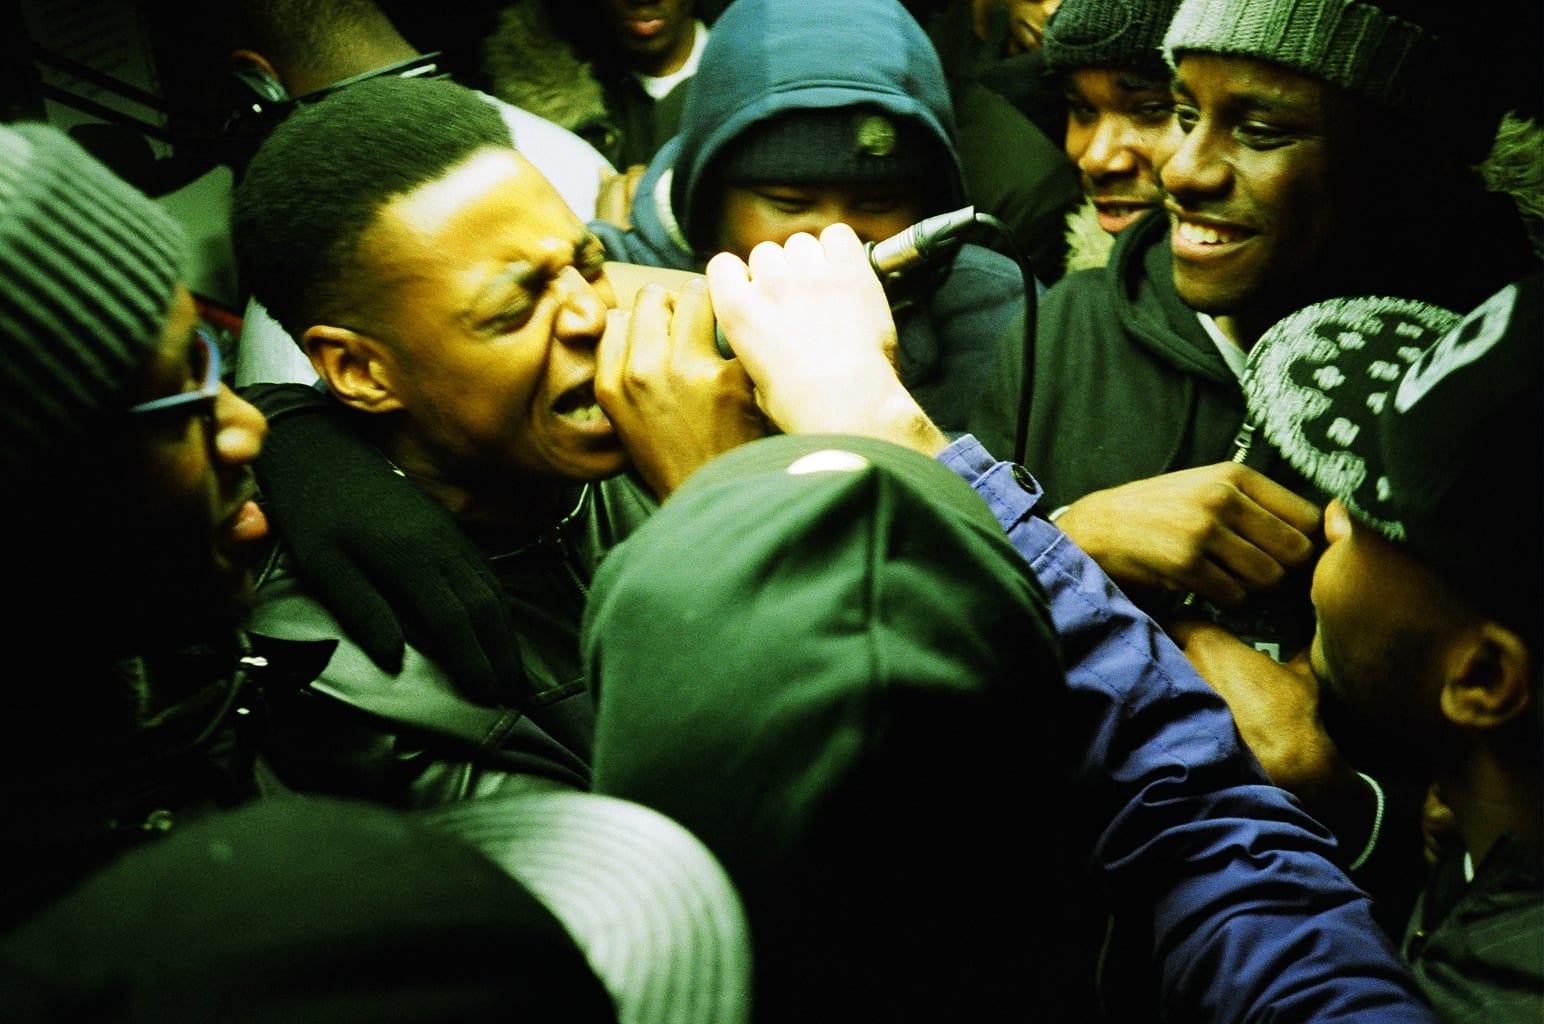 Multiple MC’s trying to seize the microphone from MC Tempo at Once Upon a Grime’s 5th Birthday set. Deja Vu, 2015 © Wot Do You Call It